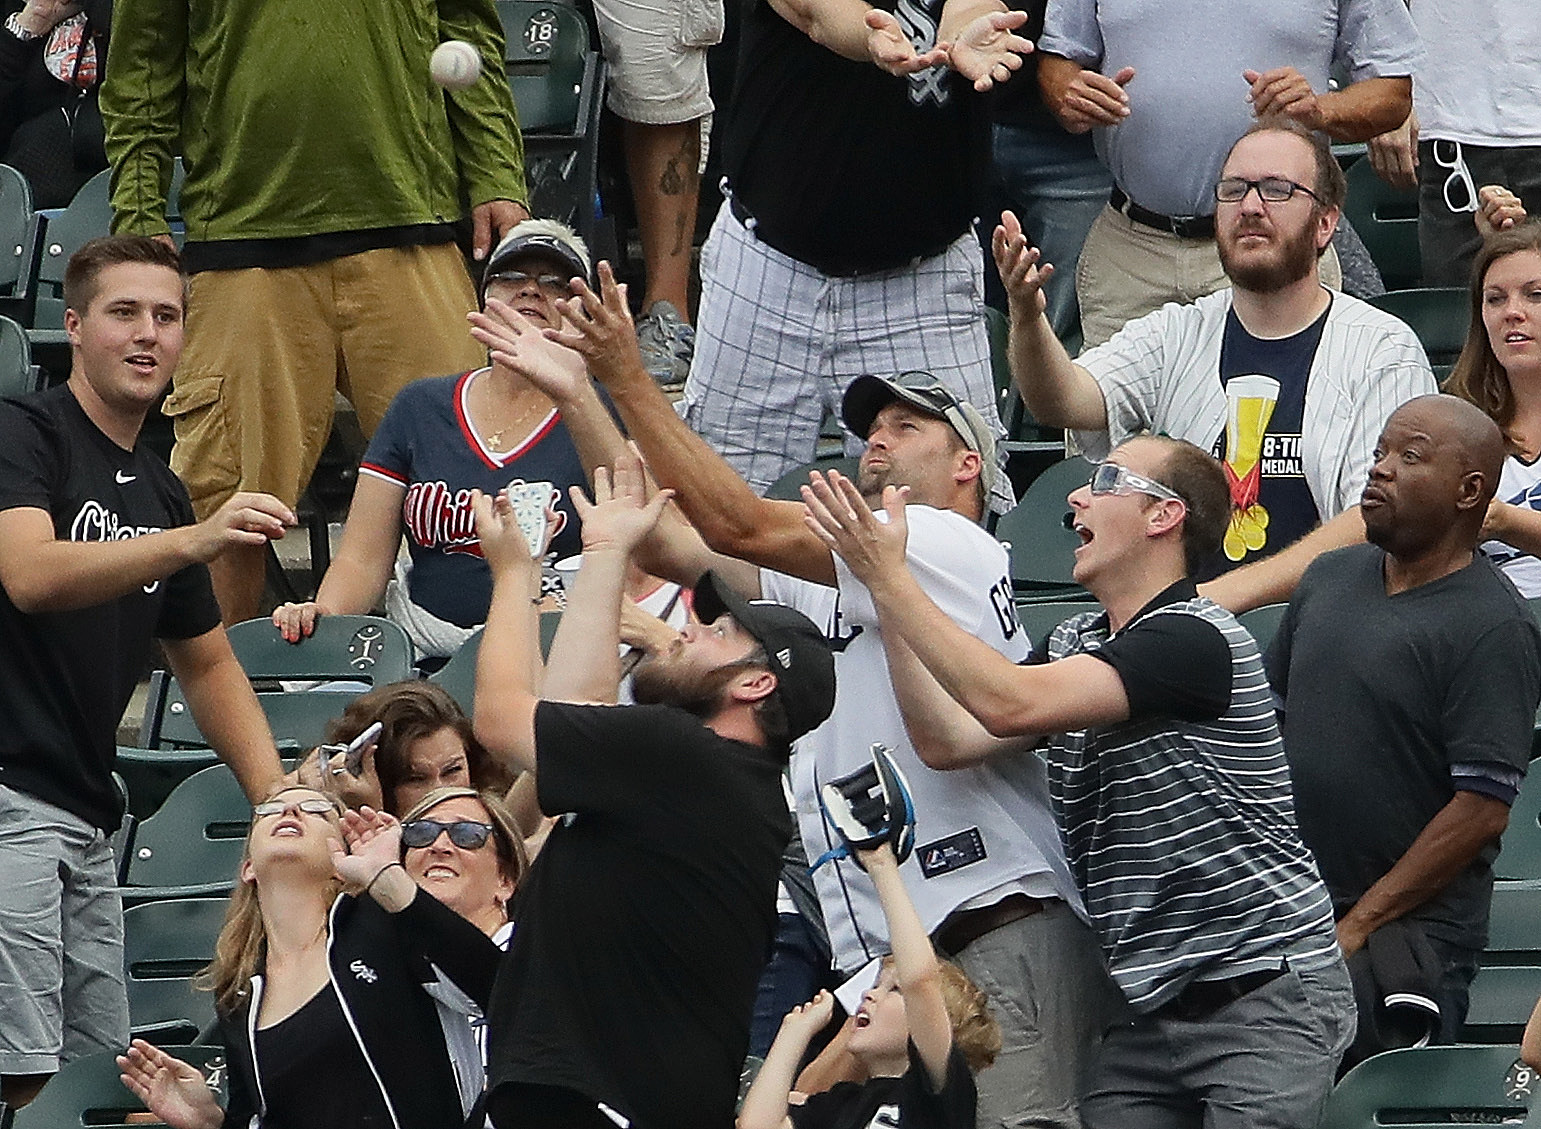 Fan at White Sox-Royals game struck in mouth by foul ball